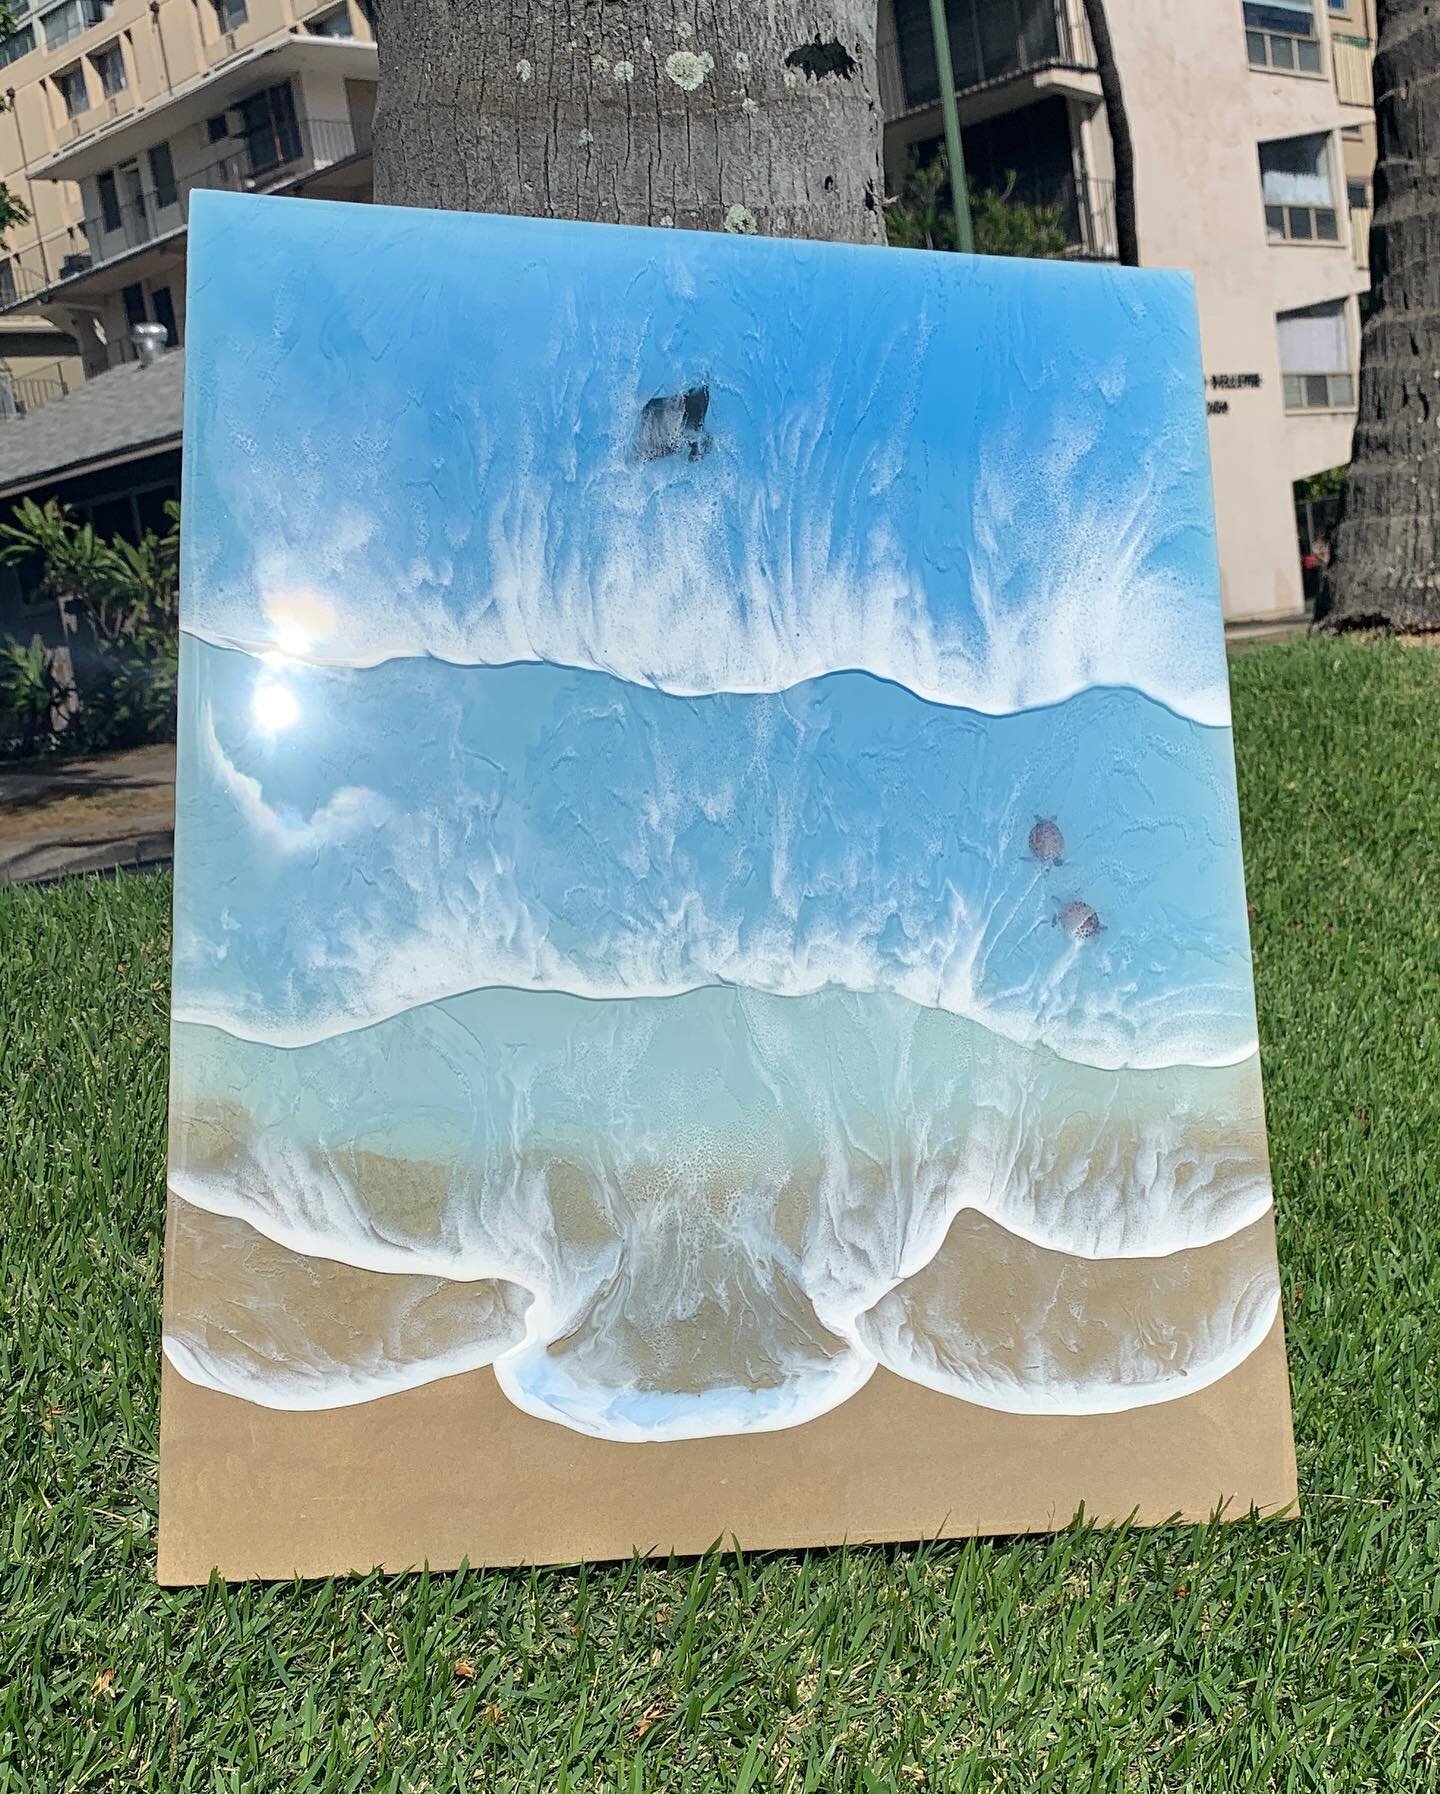 AVAILABLE!!!
20x25&rdquo; artist panel with dancing honu (turtles) playing in the waves and a manta cruising by in the distance. There&rsquo;s nothing more peaceful than watching one of those majestic giants glide past you while diving. They soar pas